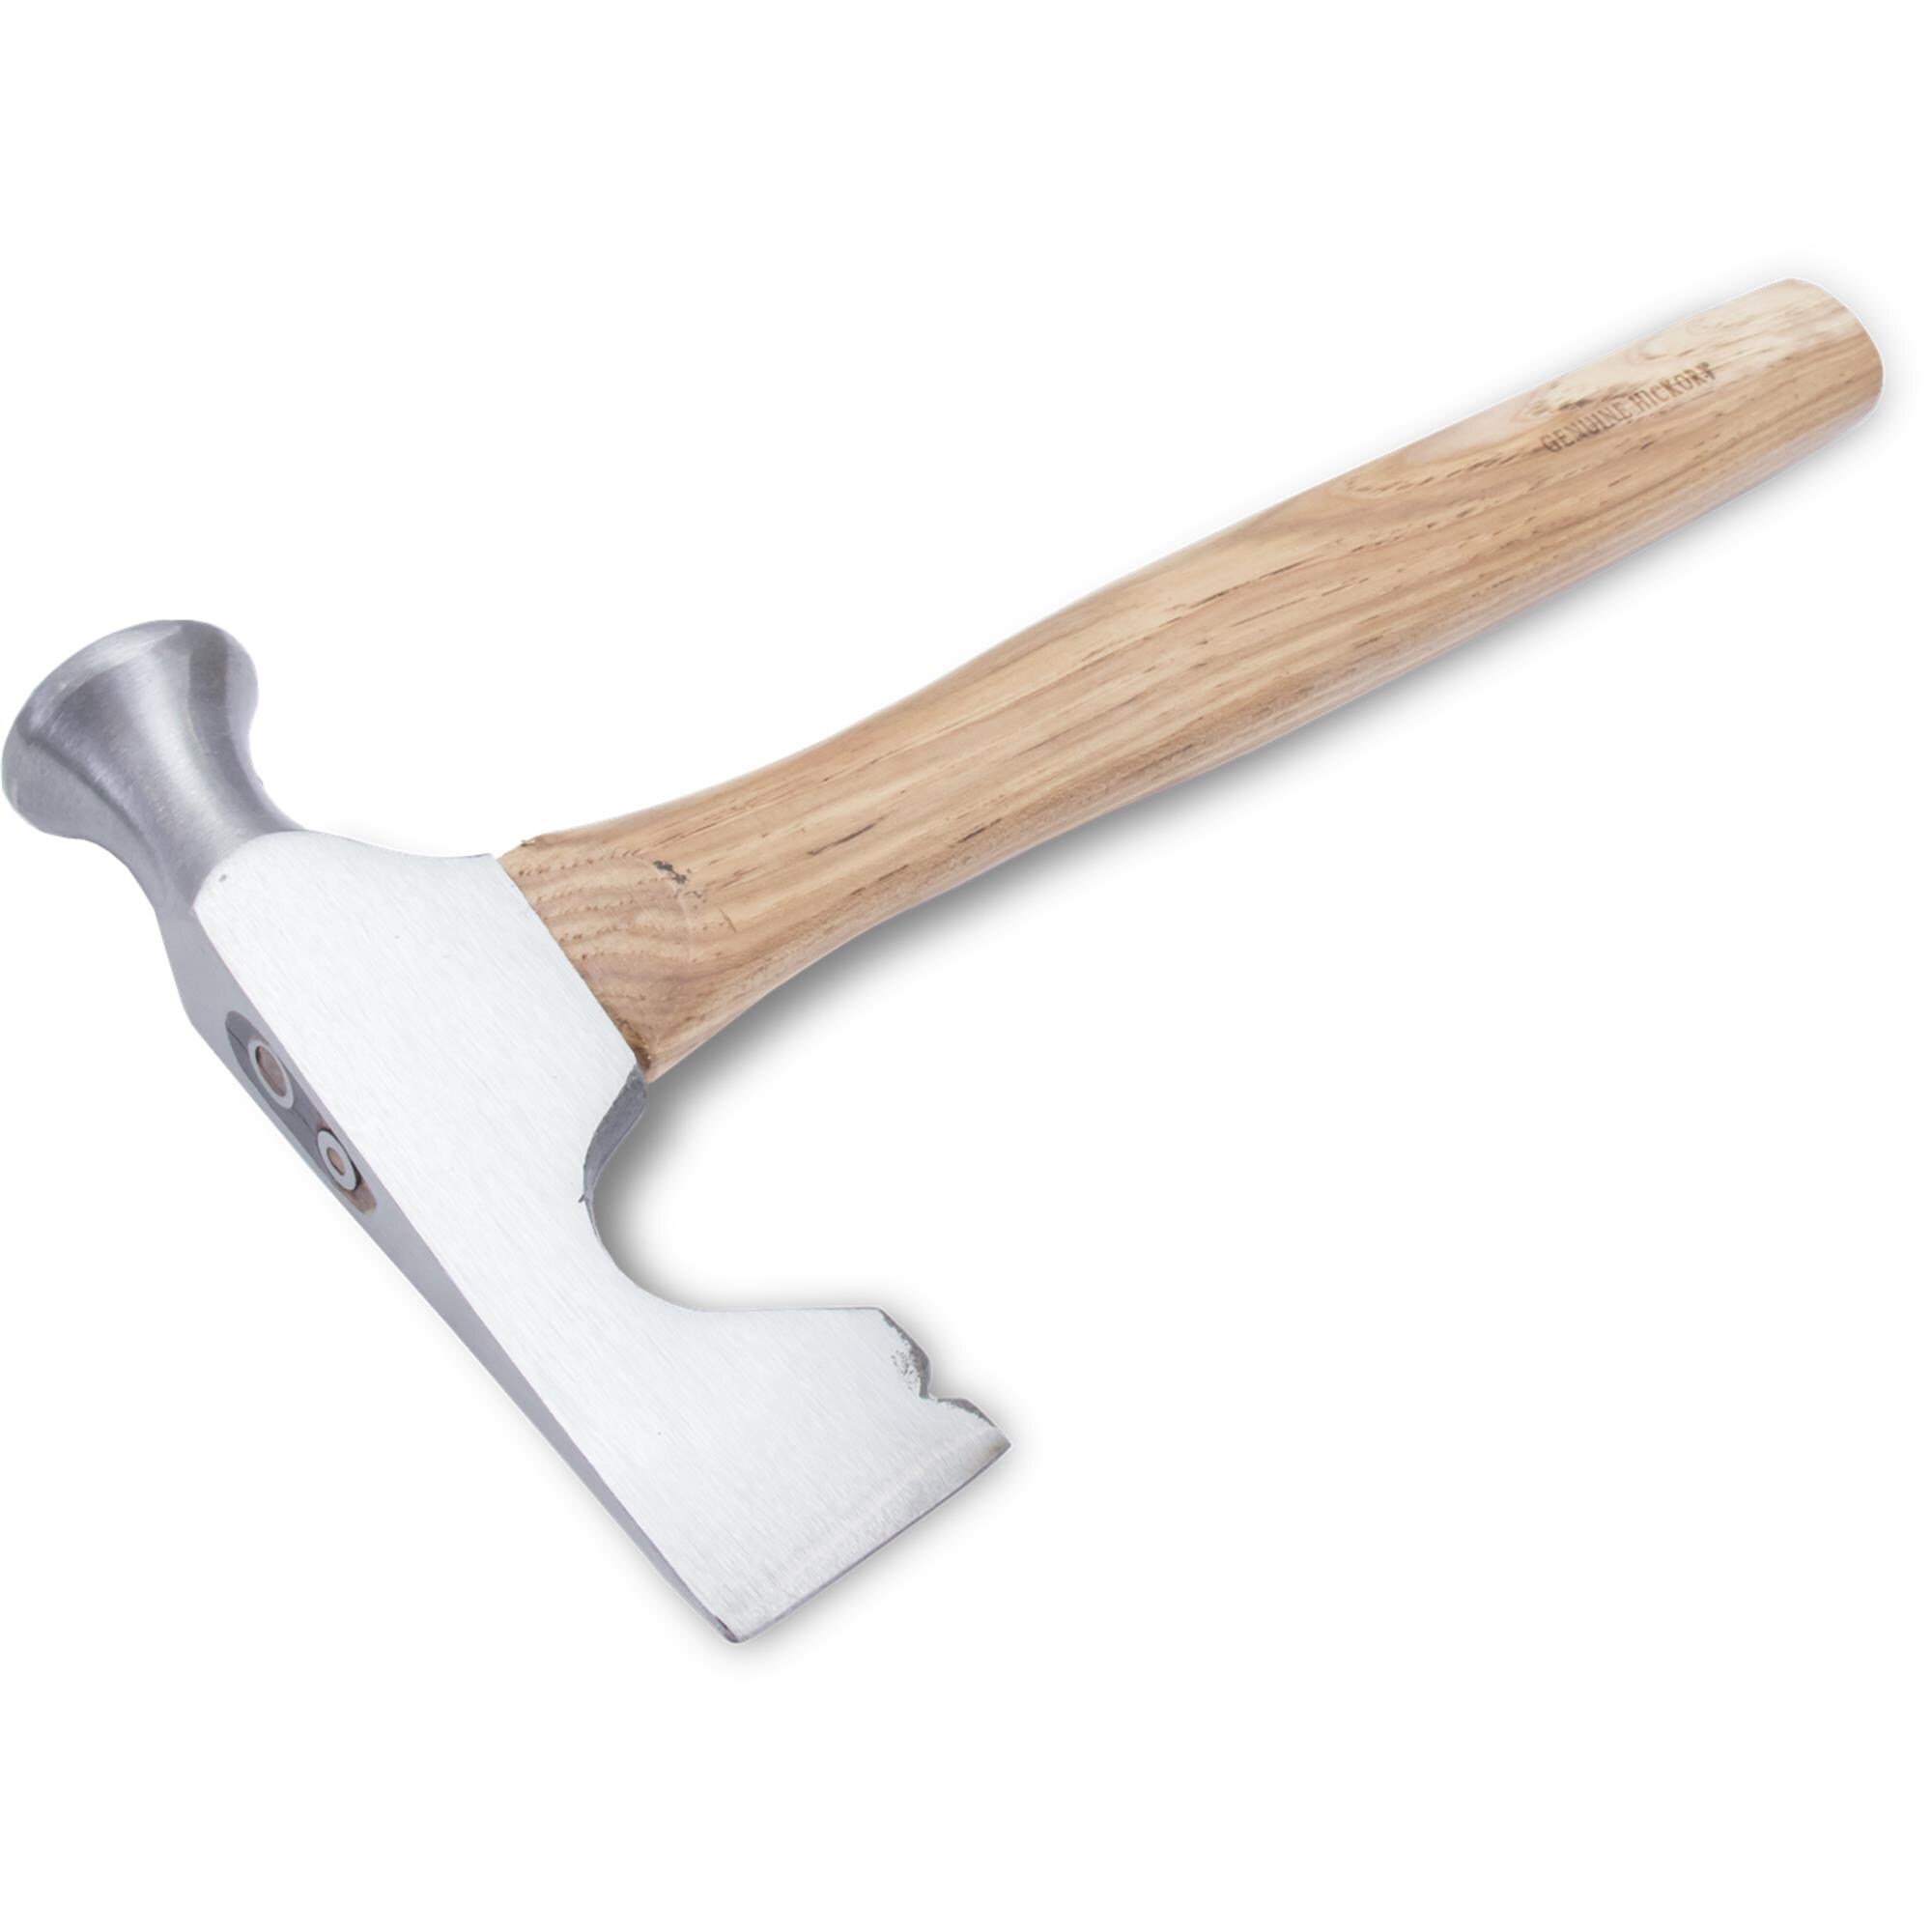 Glad Afvige Flock Marshalltown 12-oz Milled Face Steel Head Wood Drywall Hammer in the  Hammers department at Lowes.com